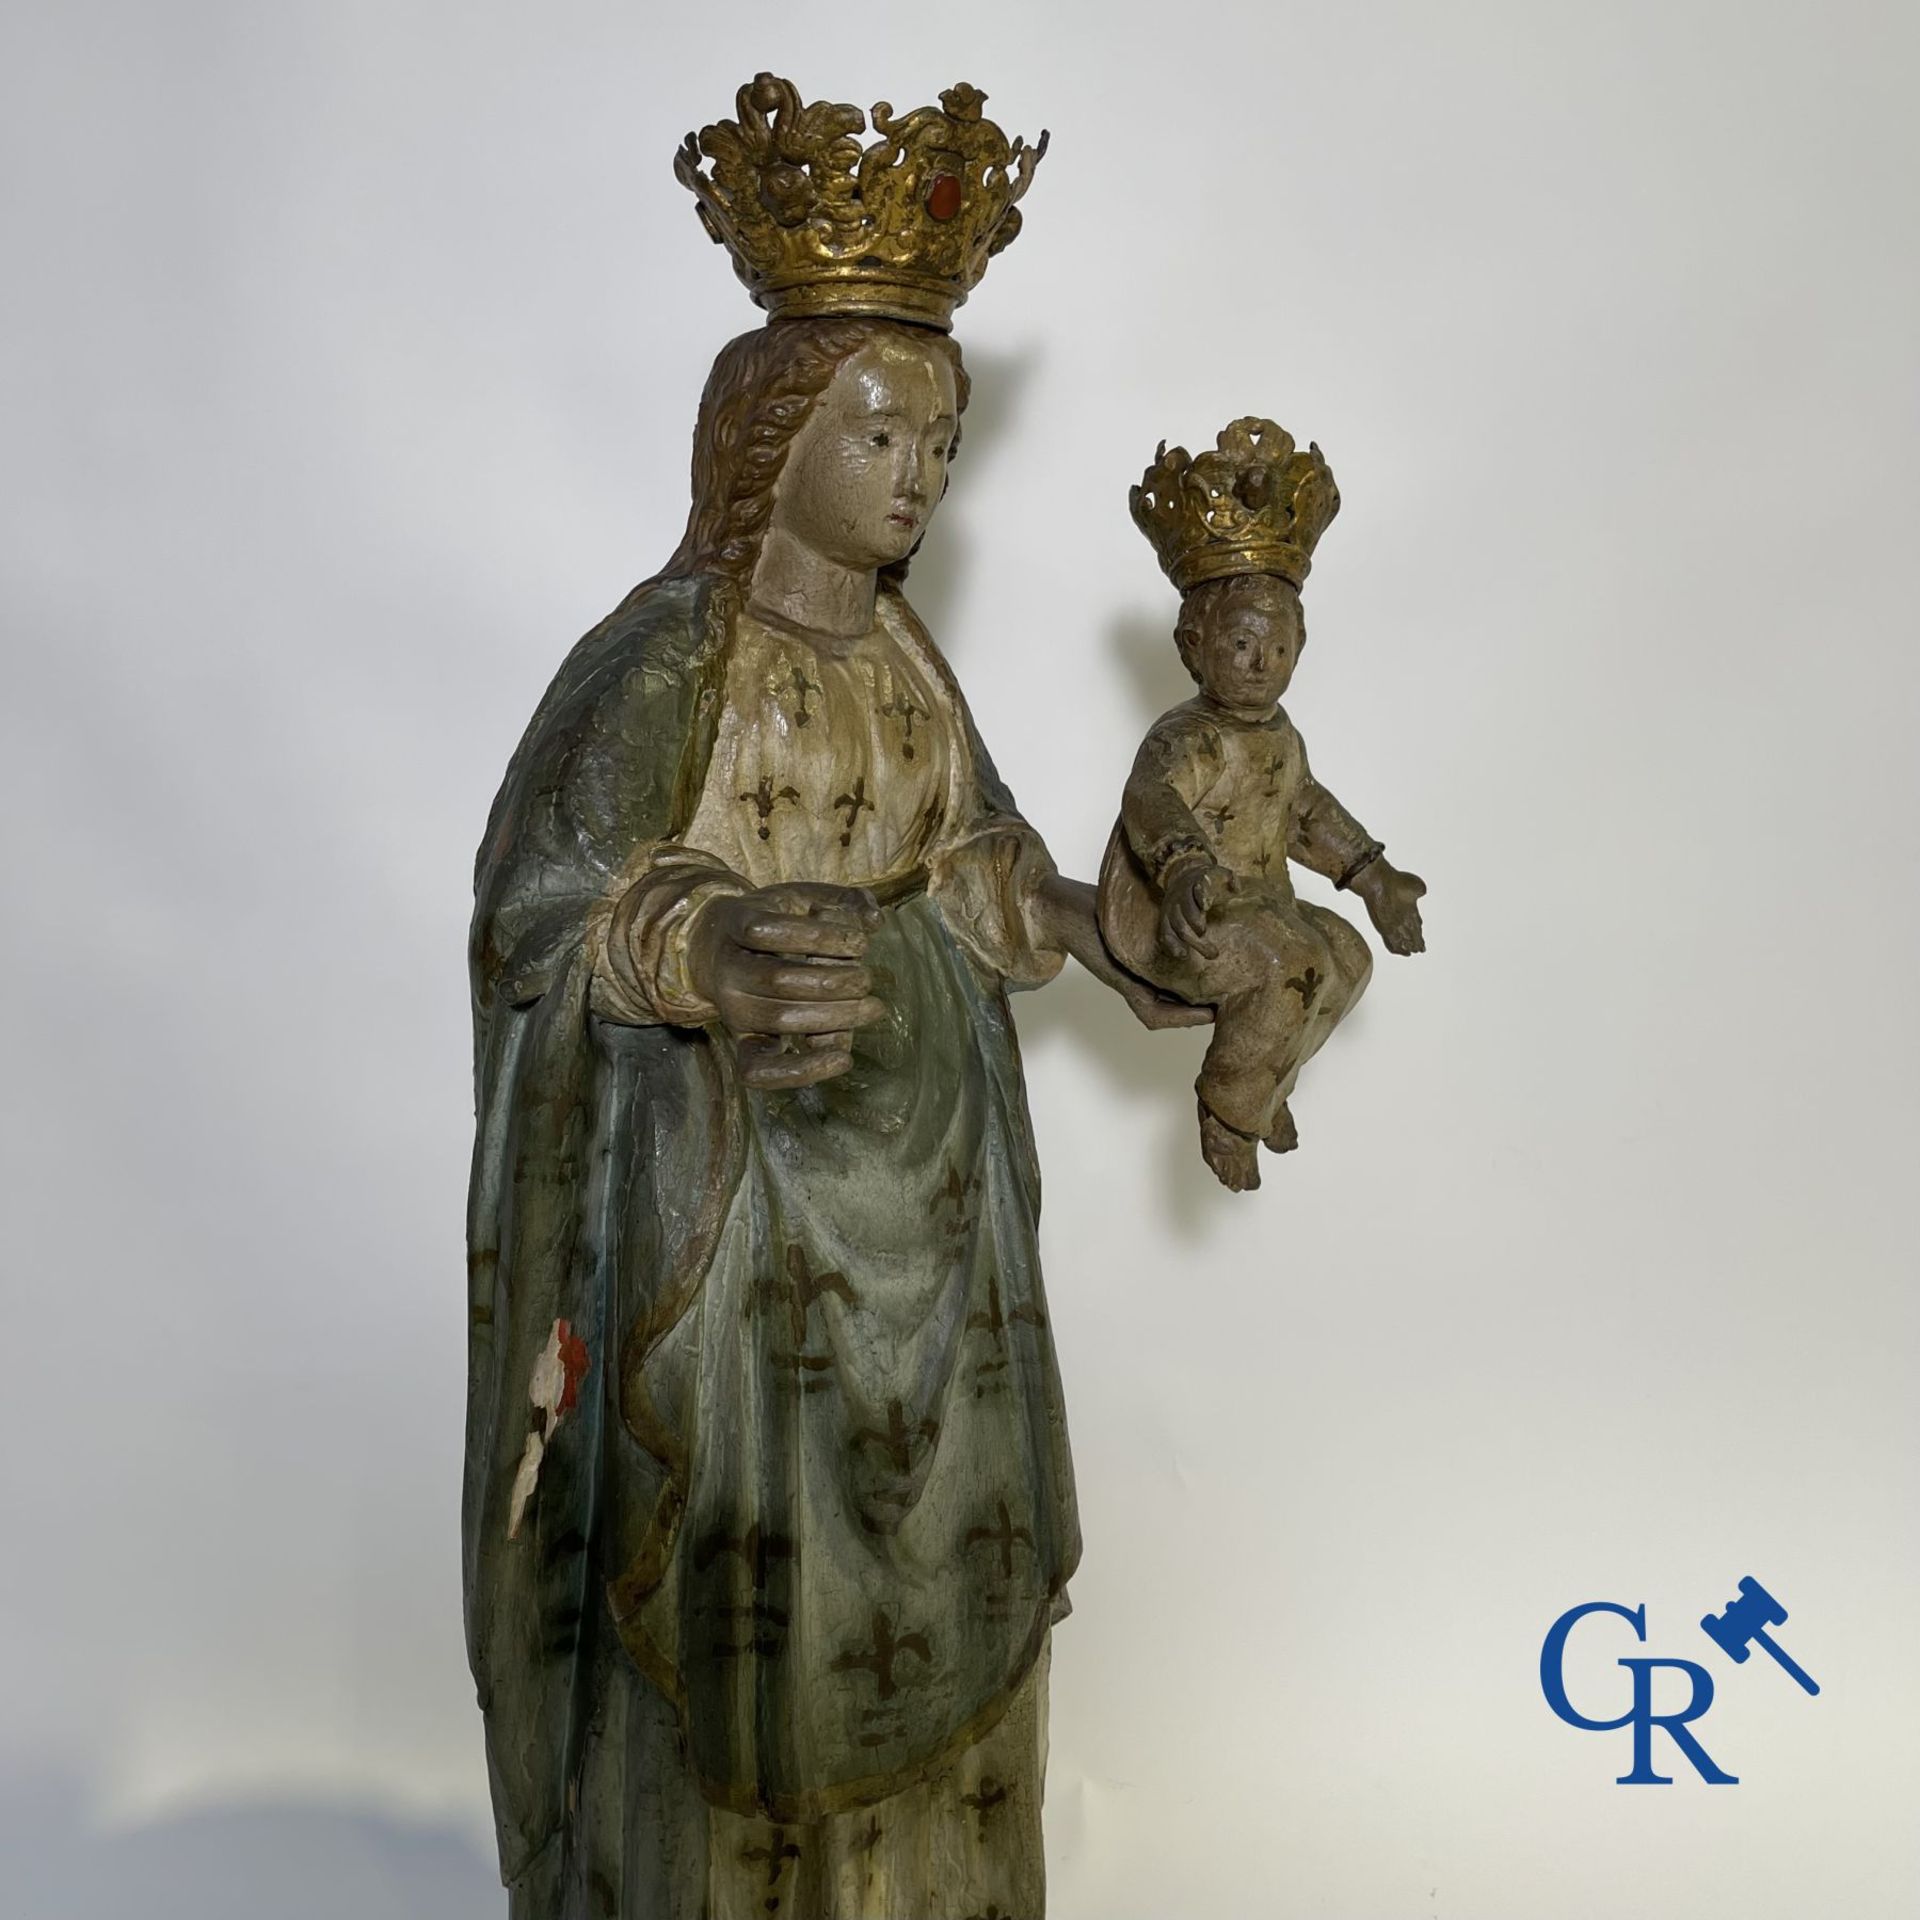 Wooden polychrome Baroque sculpture of Mary with child. The Crown inlaid with an amber-like rock. - Bild 10 aus 30